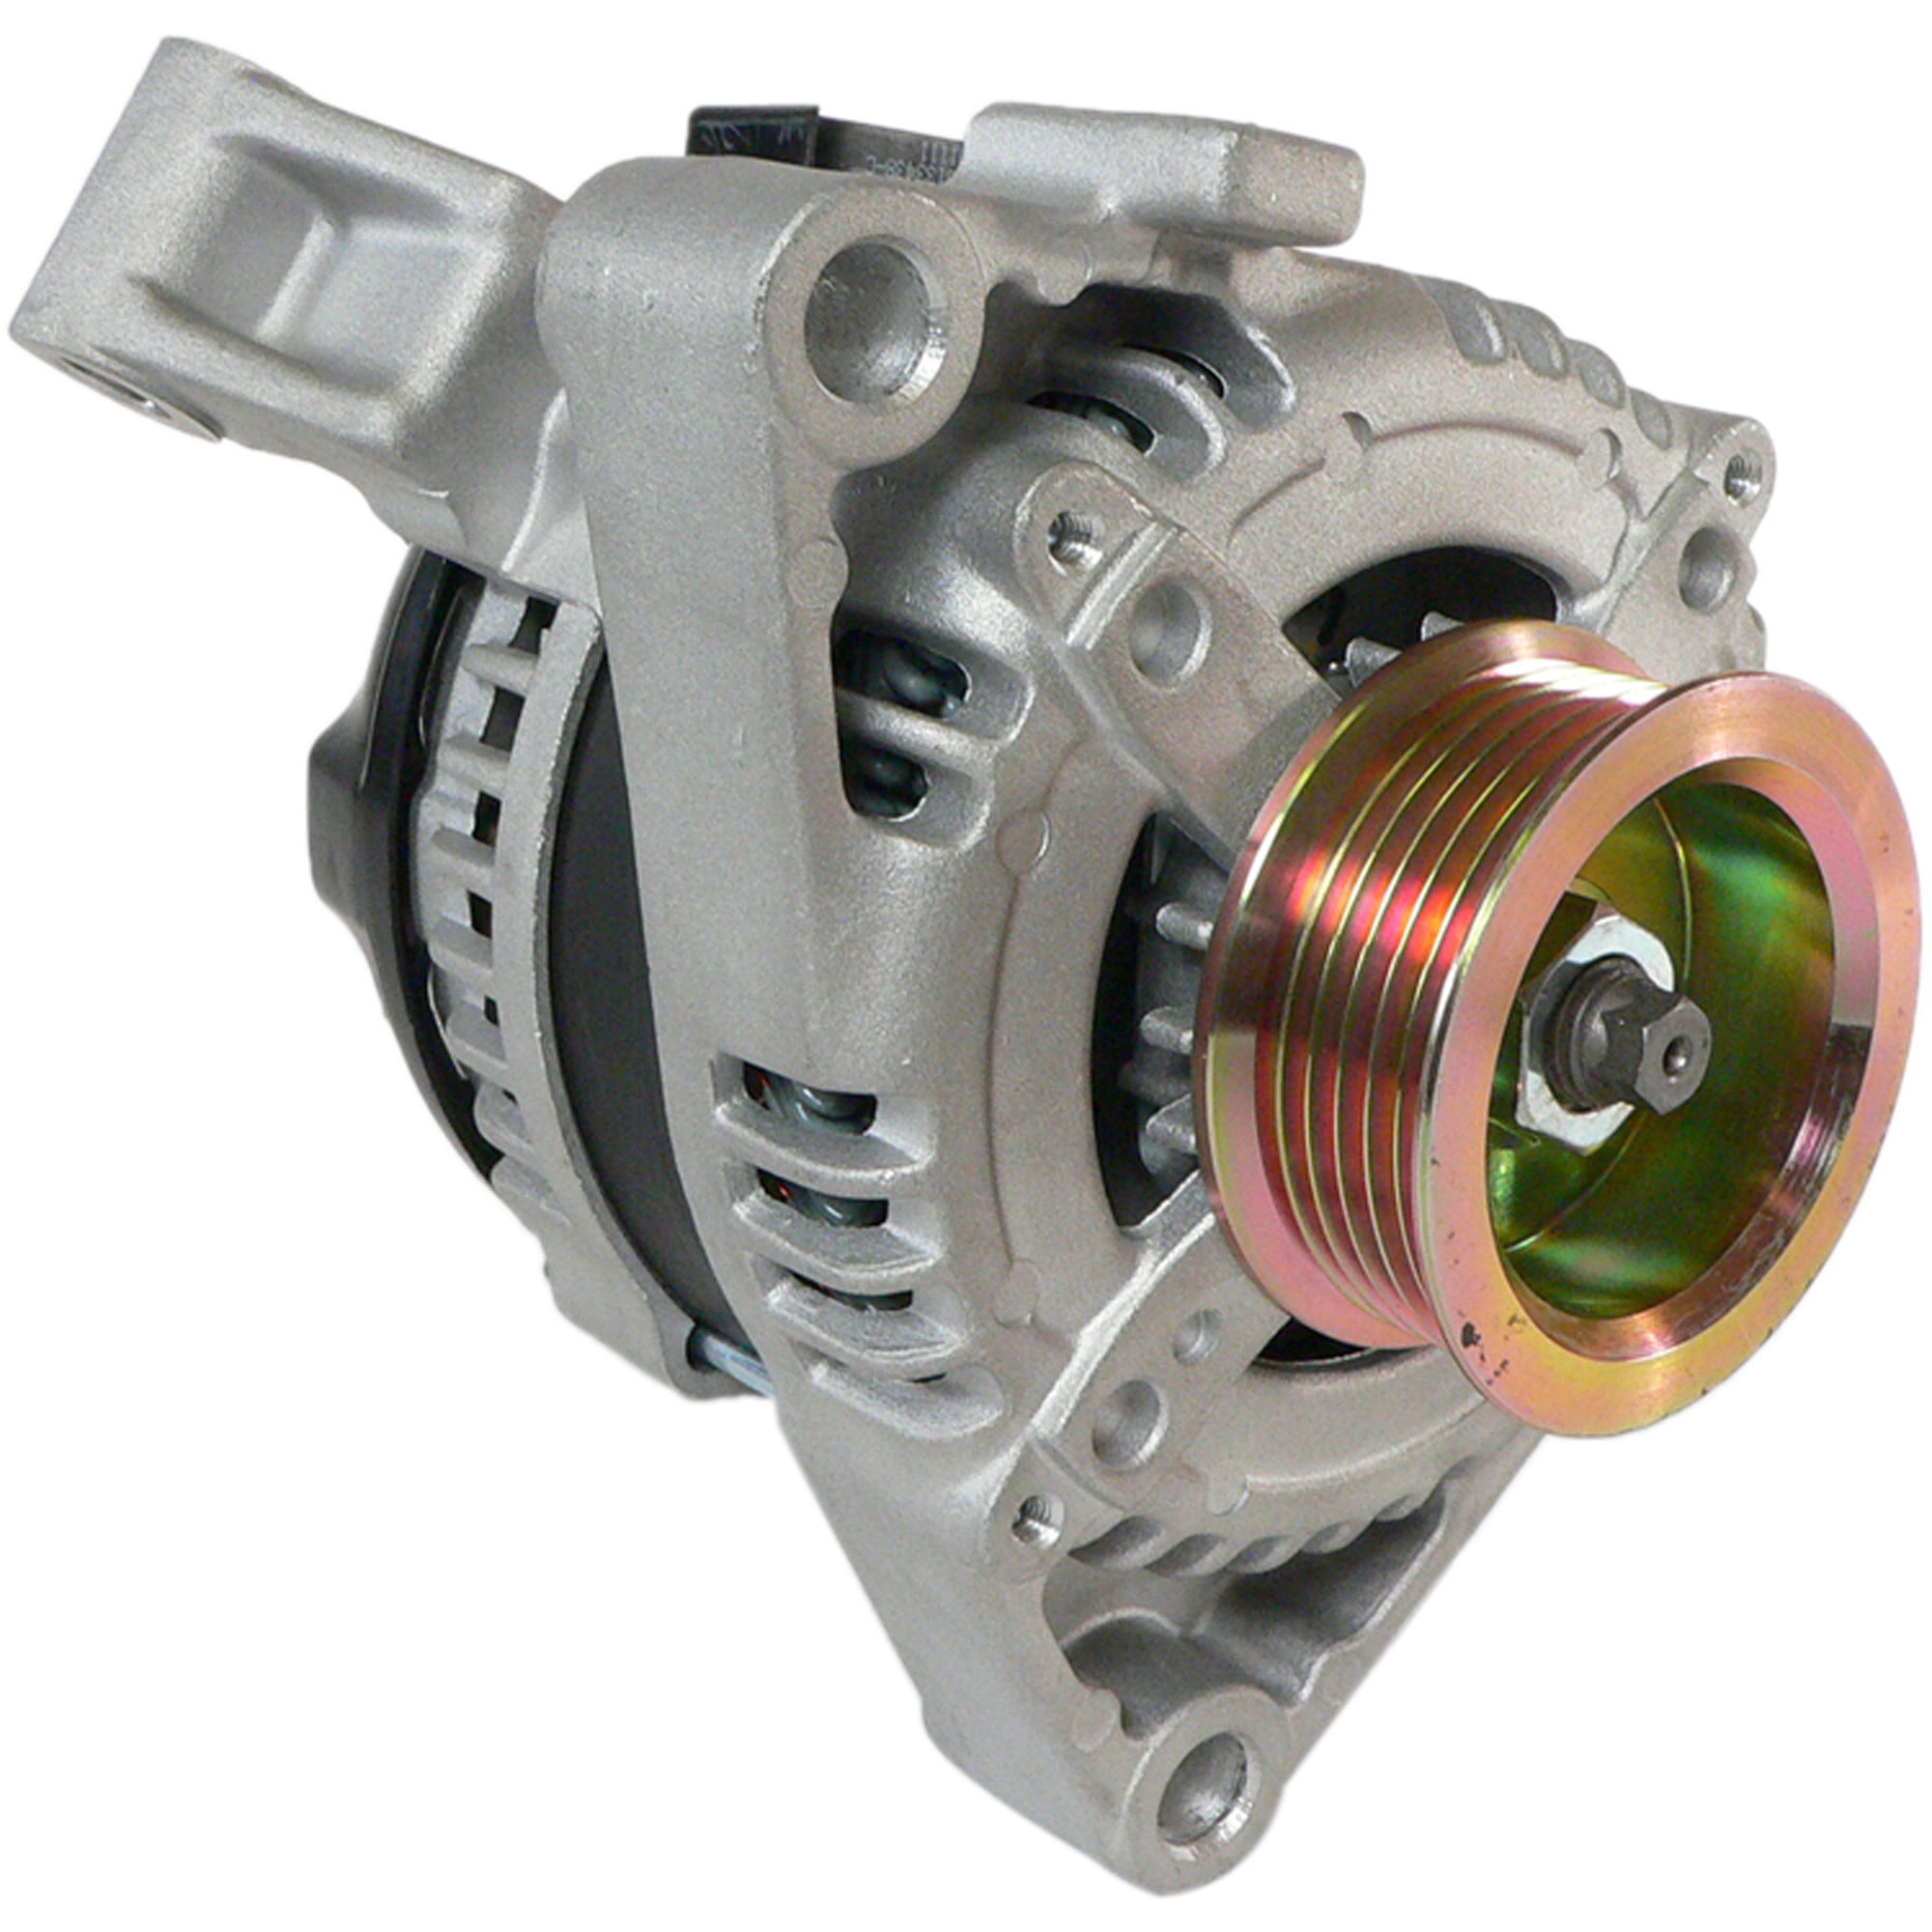 6.0L CTS 2006-2007 104210-3340 104210-4380 25750935 25766345 11037 DB Electrical AND0404 Remanufactured Alternator Compatible with/Replacement for 5.7L Cadillac CTS 2004-2005 